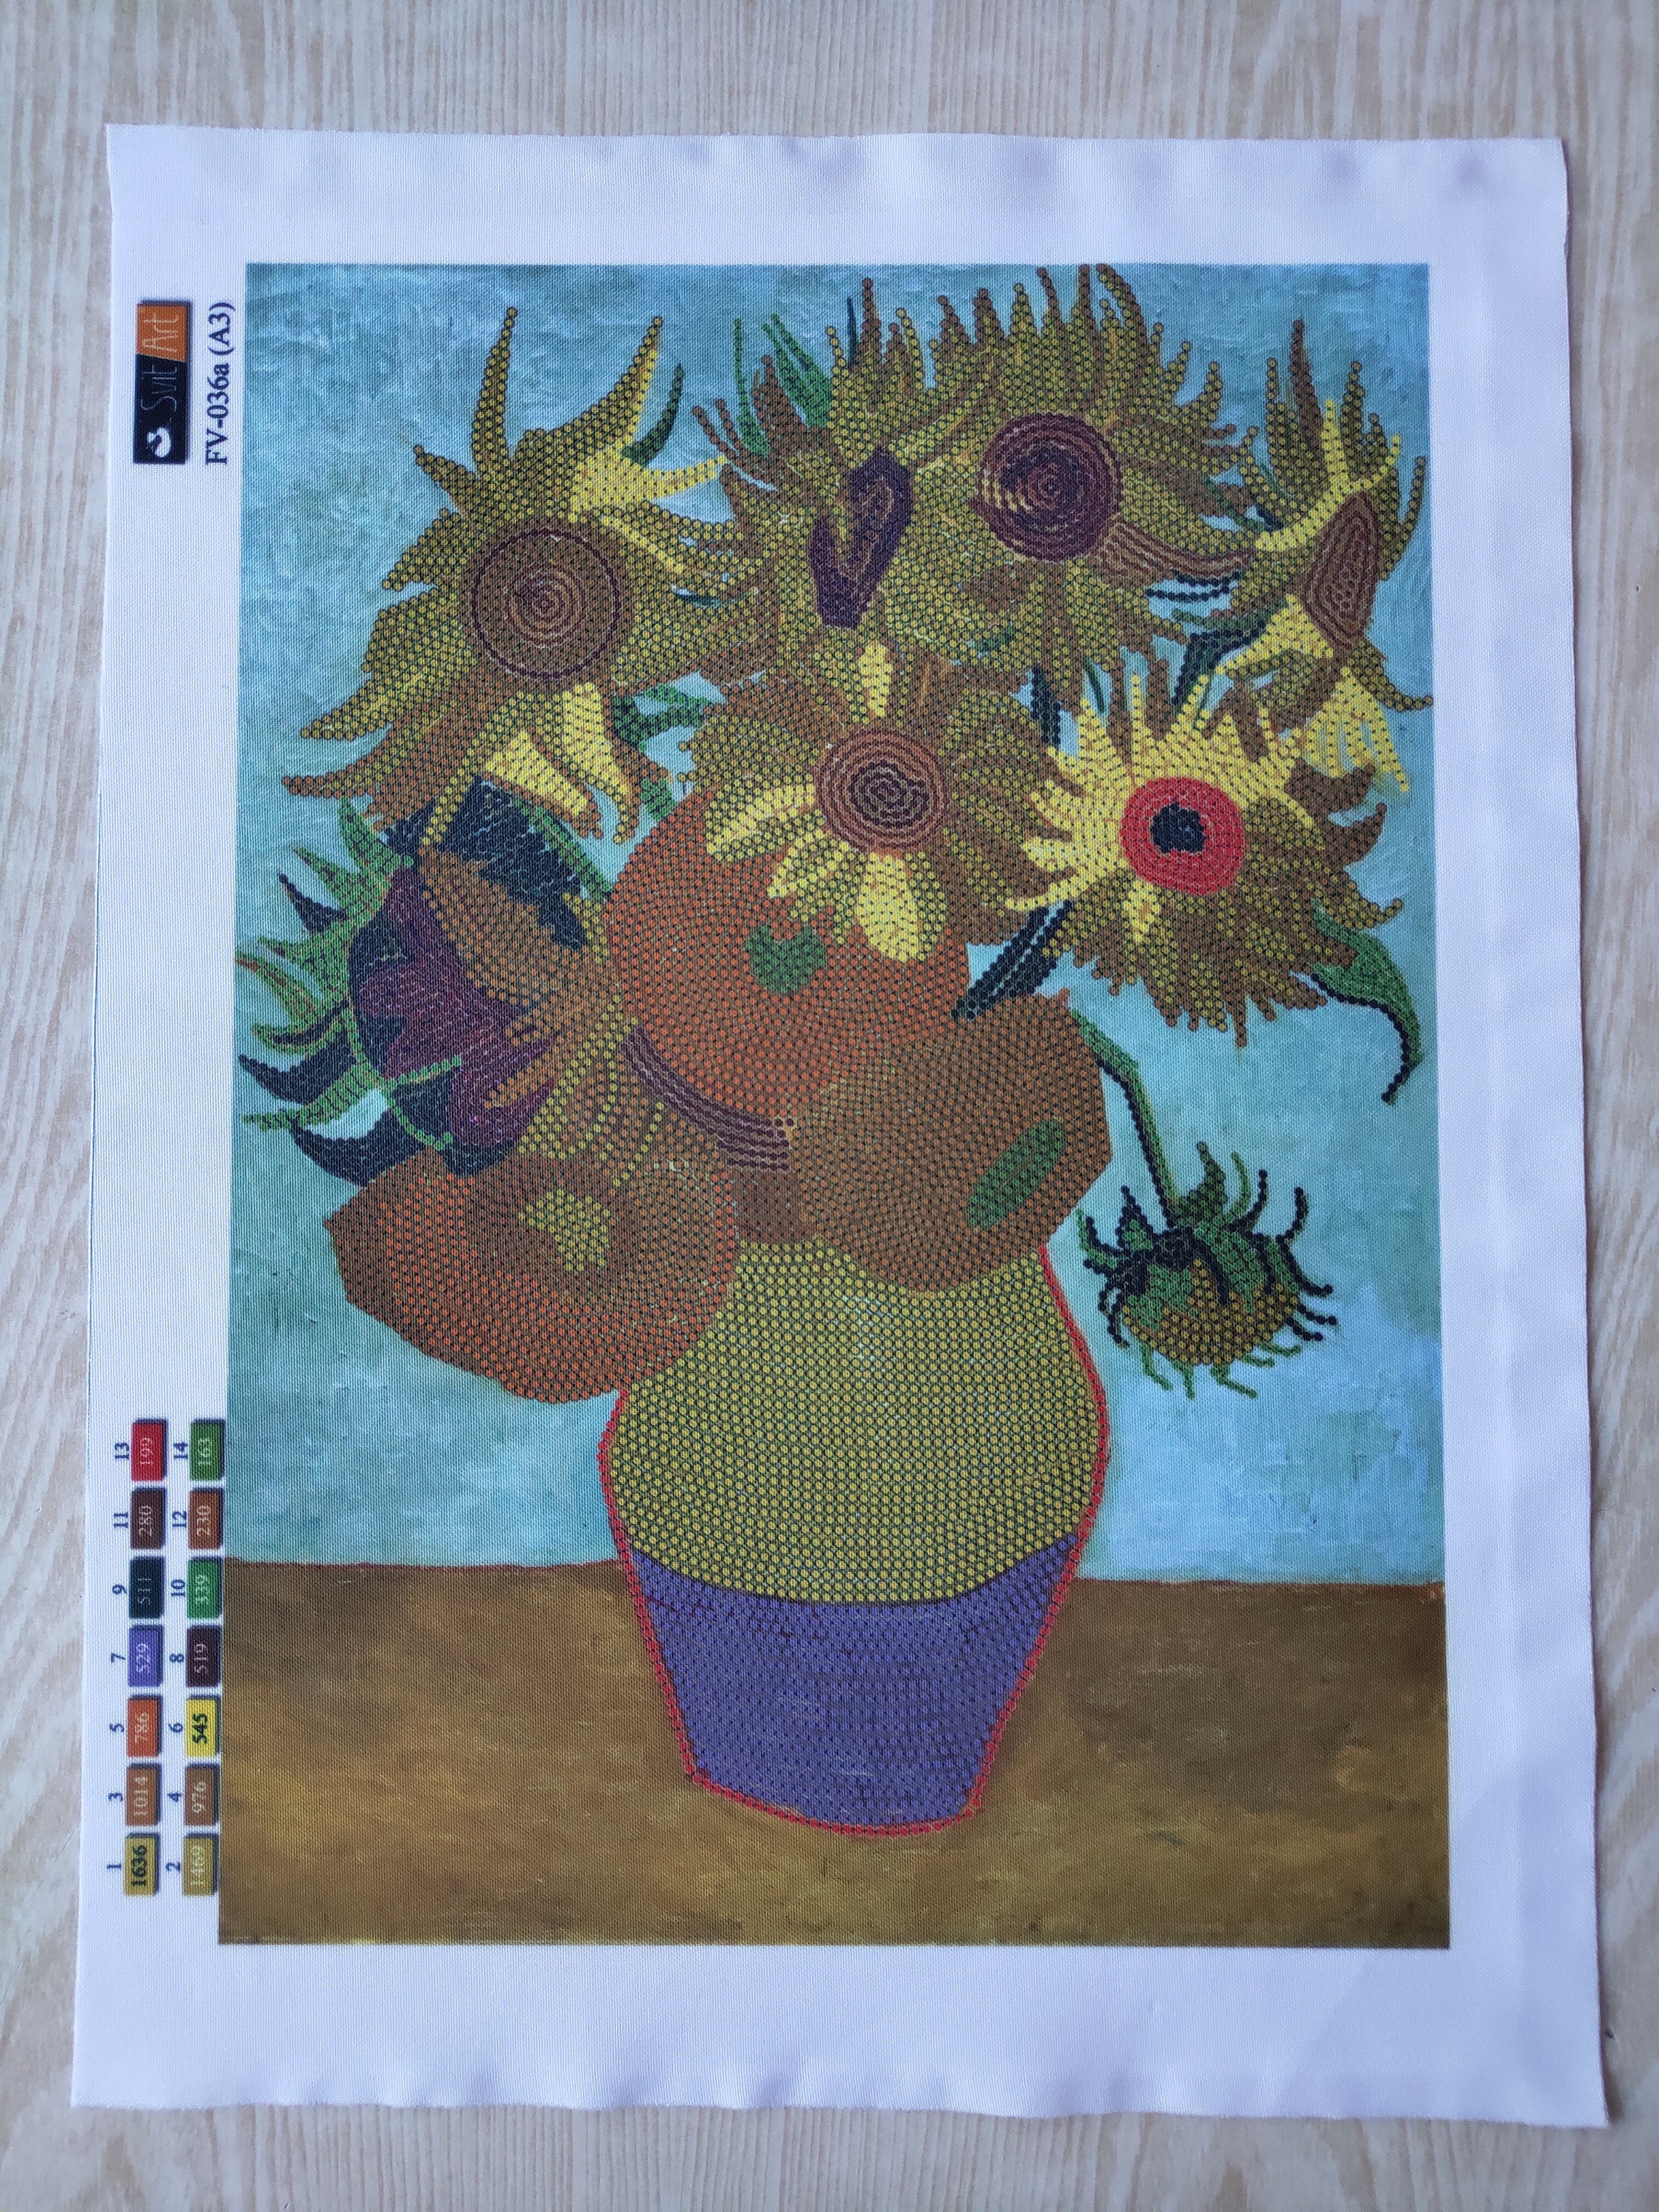 DIY Bead Embroidery Kit Needlepoint Beading Two cut sunflowers by V Van Gogh 